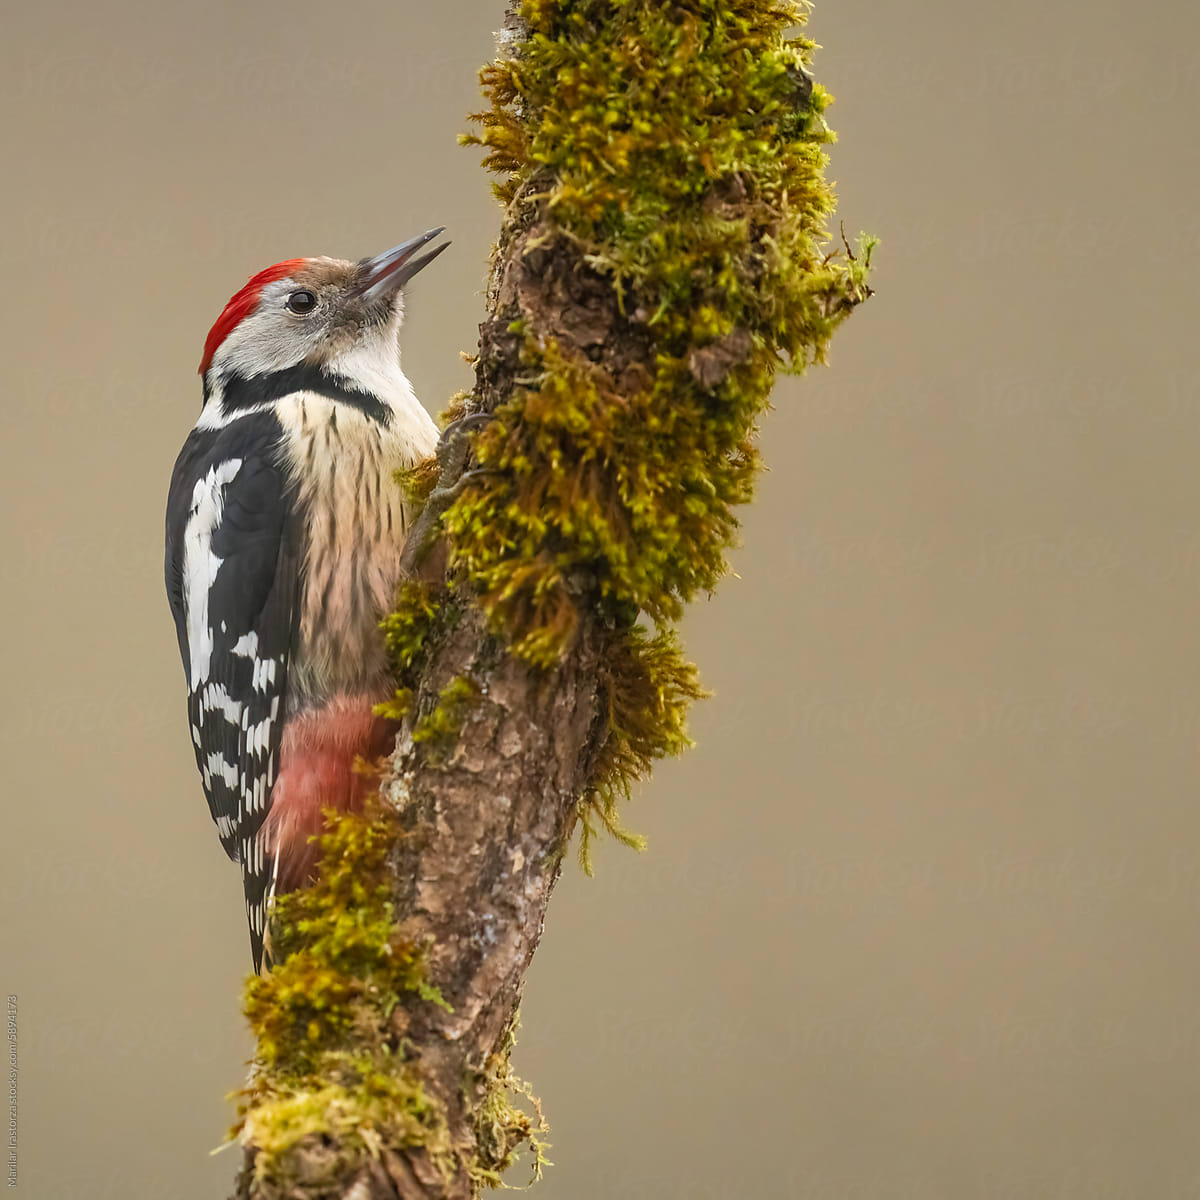 Middle Spotted Woodpecker Perched On A Mossy Tree Branch